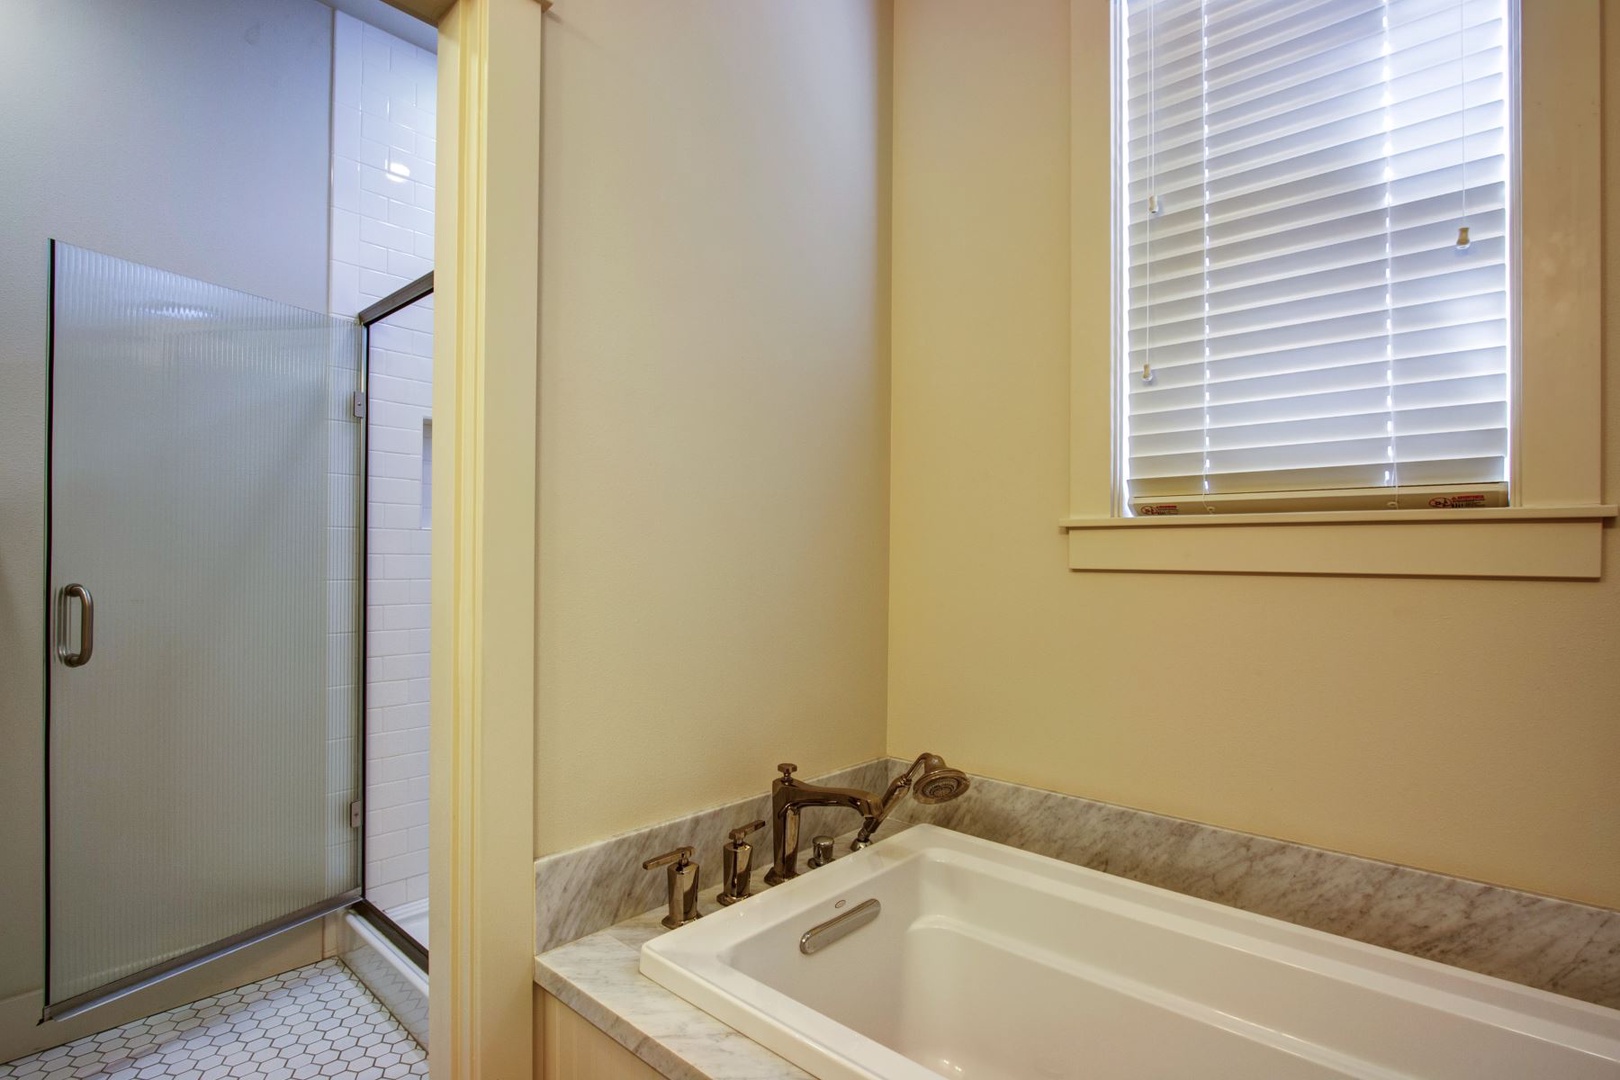 King primary bath with heated floors, walk in shower and a marble bath tub